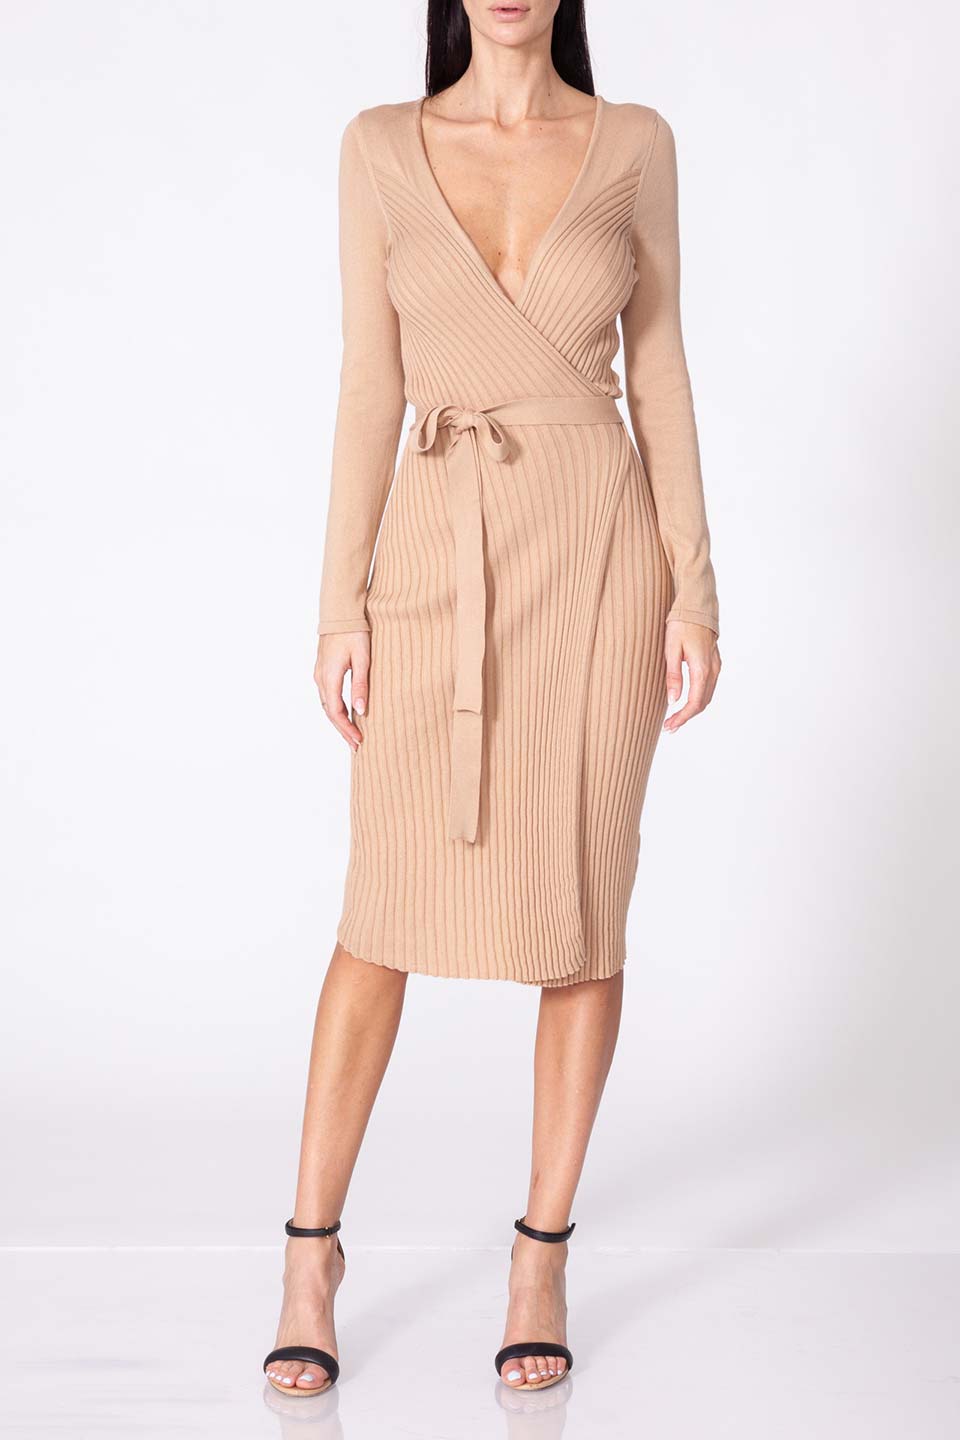 Fashion designer midi dress in sand color. Cashmere fabric and V-neck style. Product gallery 1